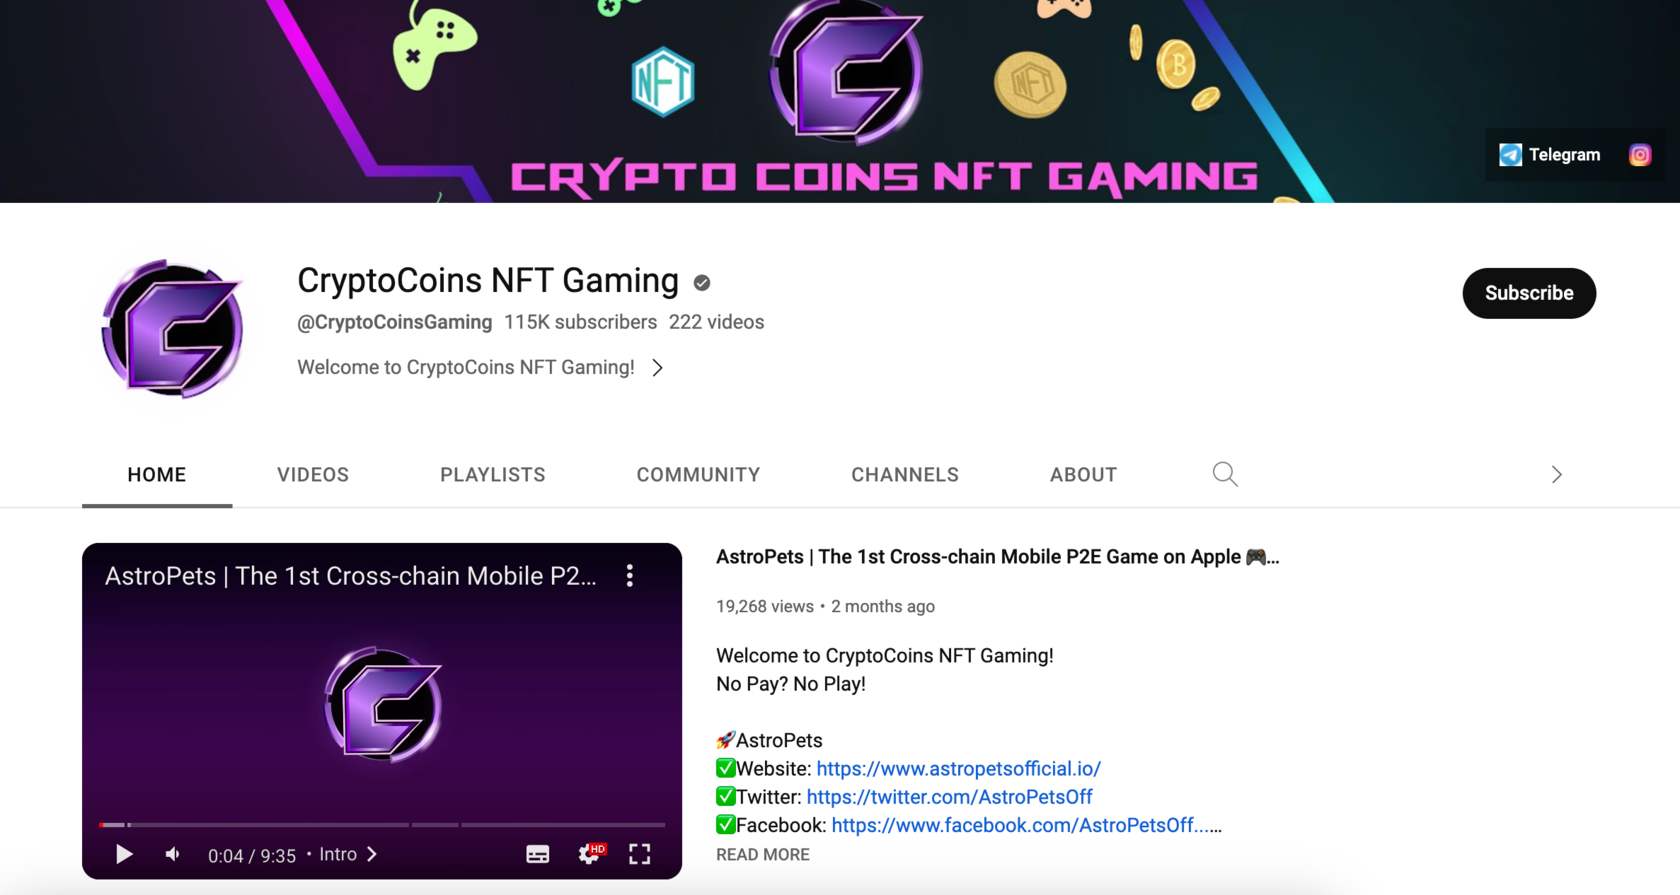 CryptoCoins NFT Gaming